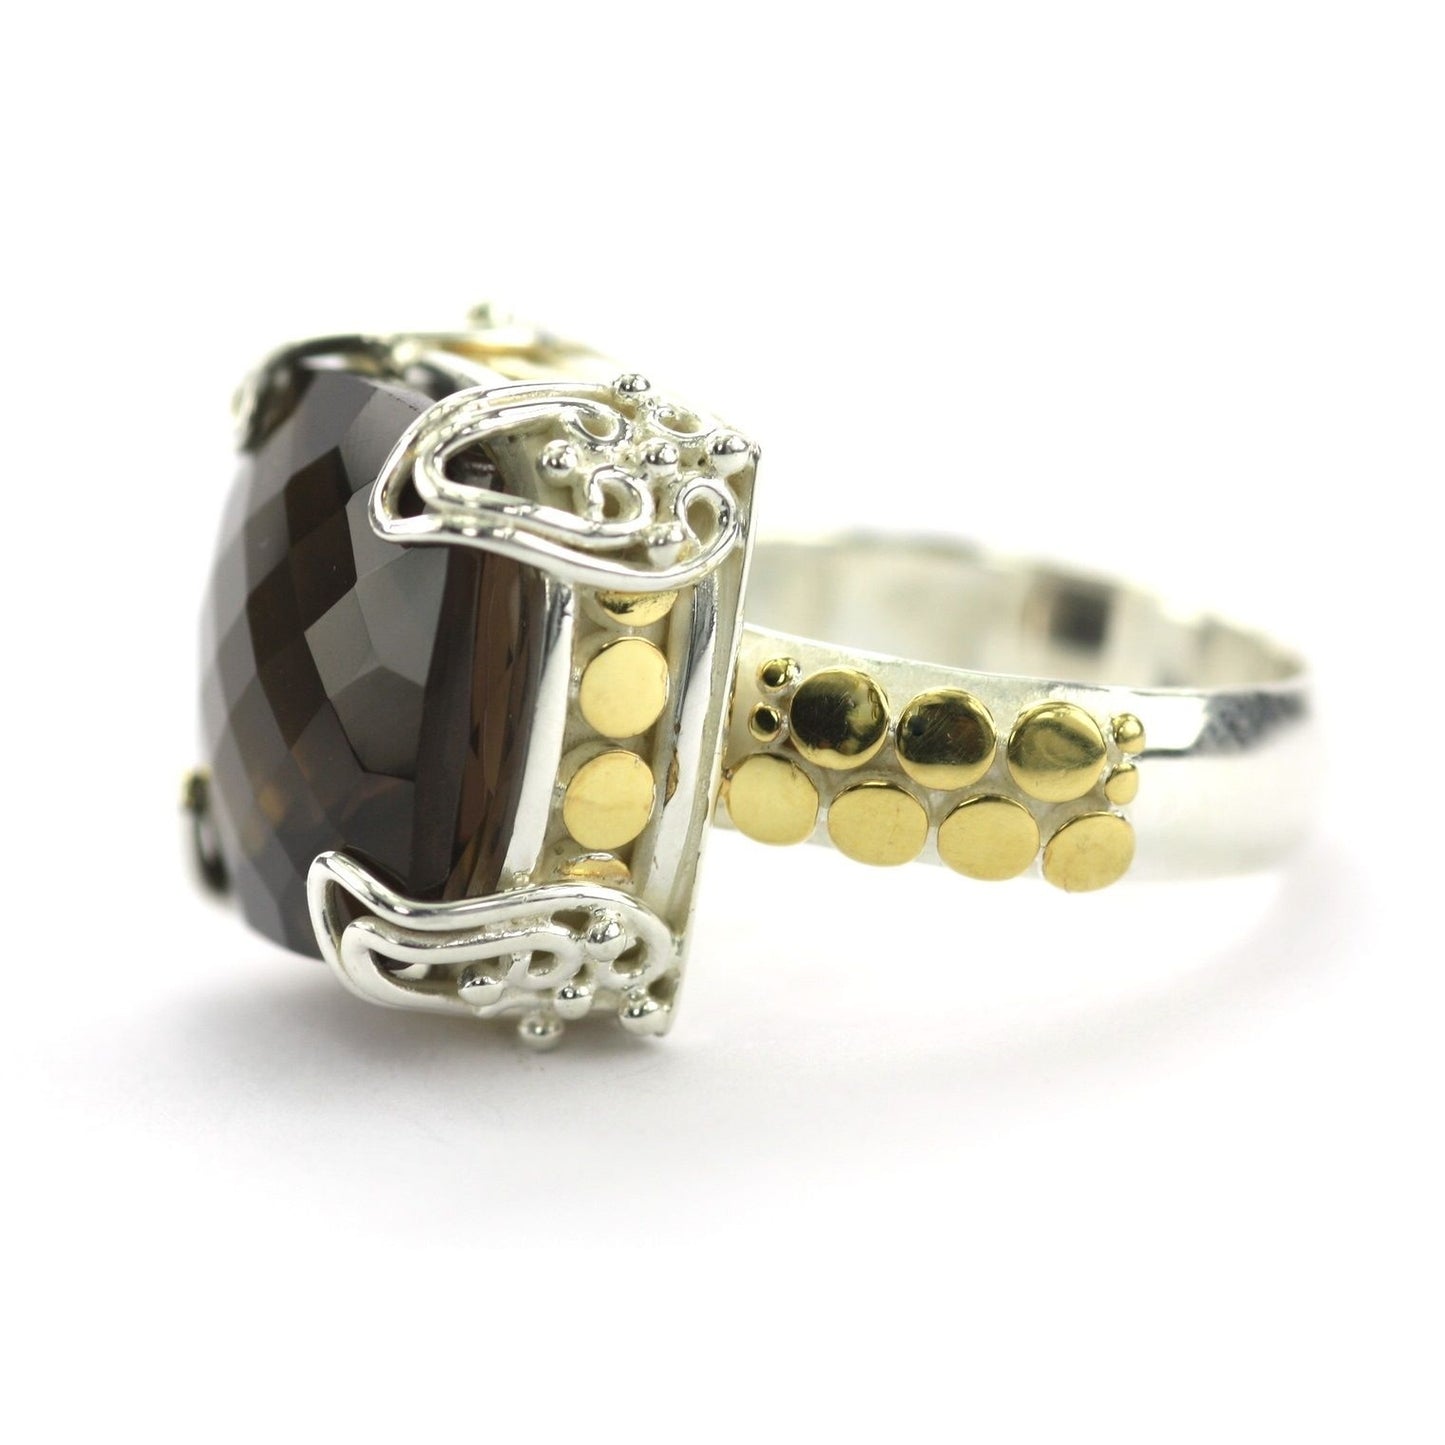 Silver and gold ring with smoky topaz gemstone.